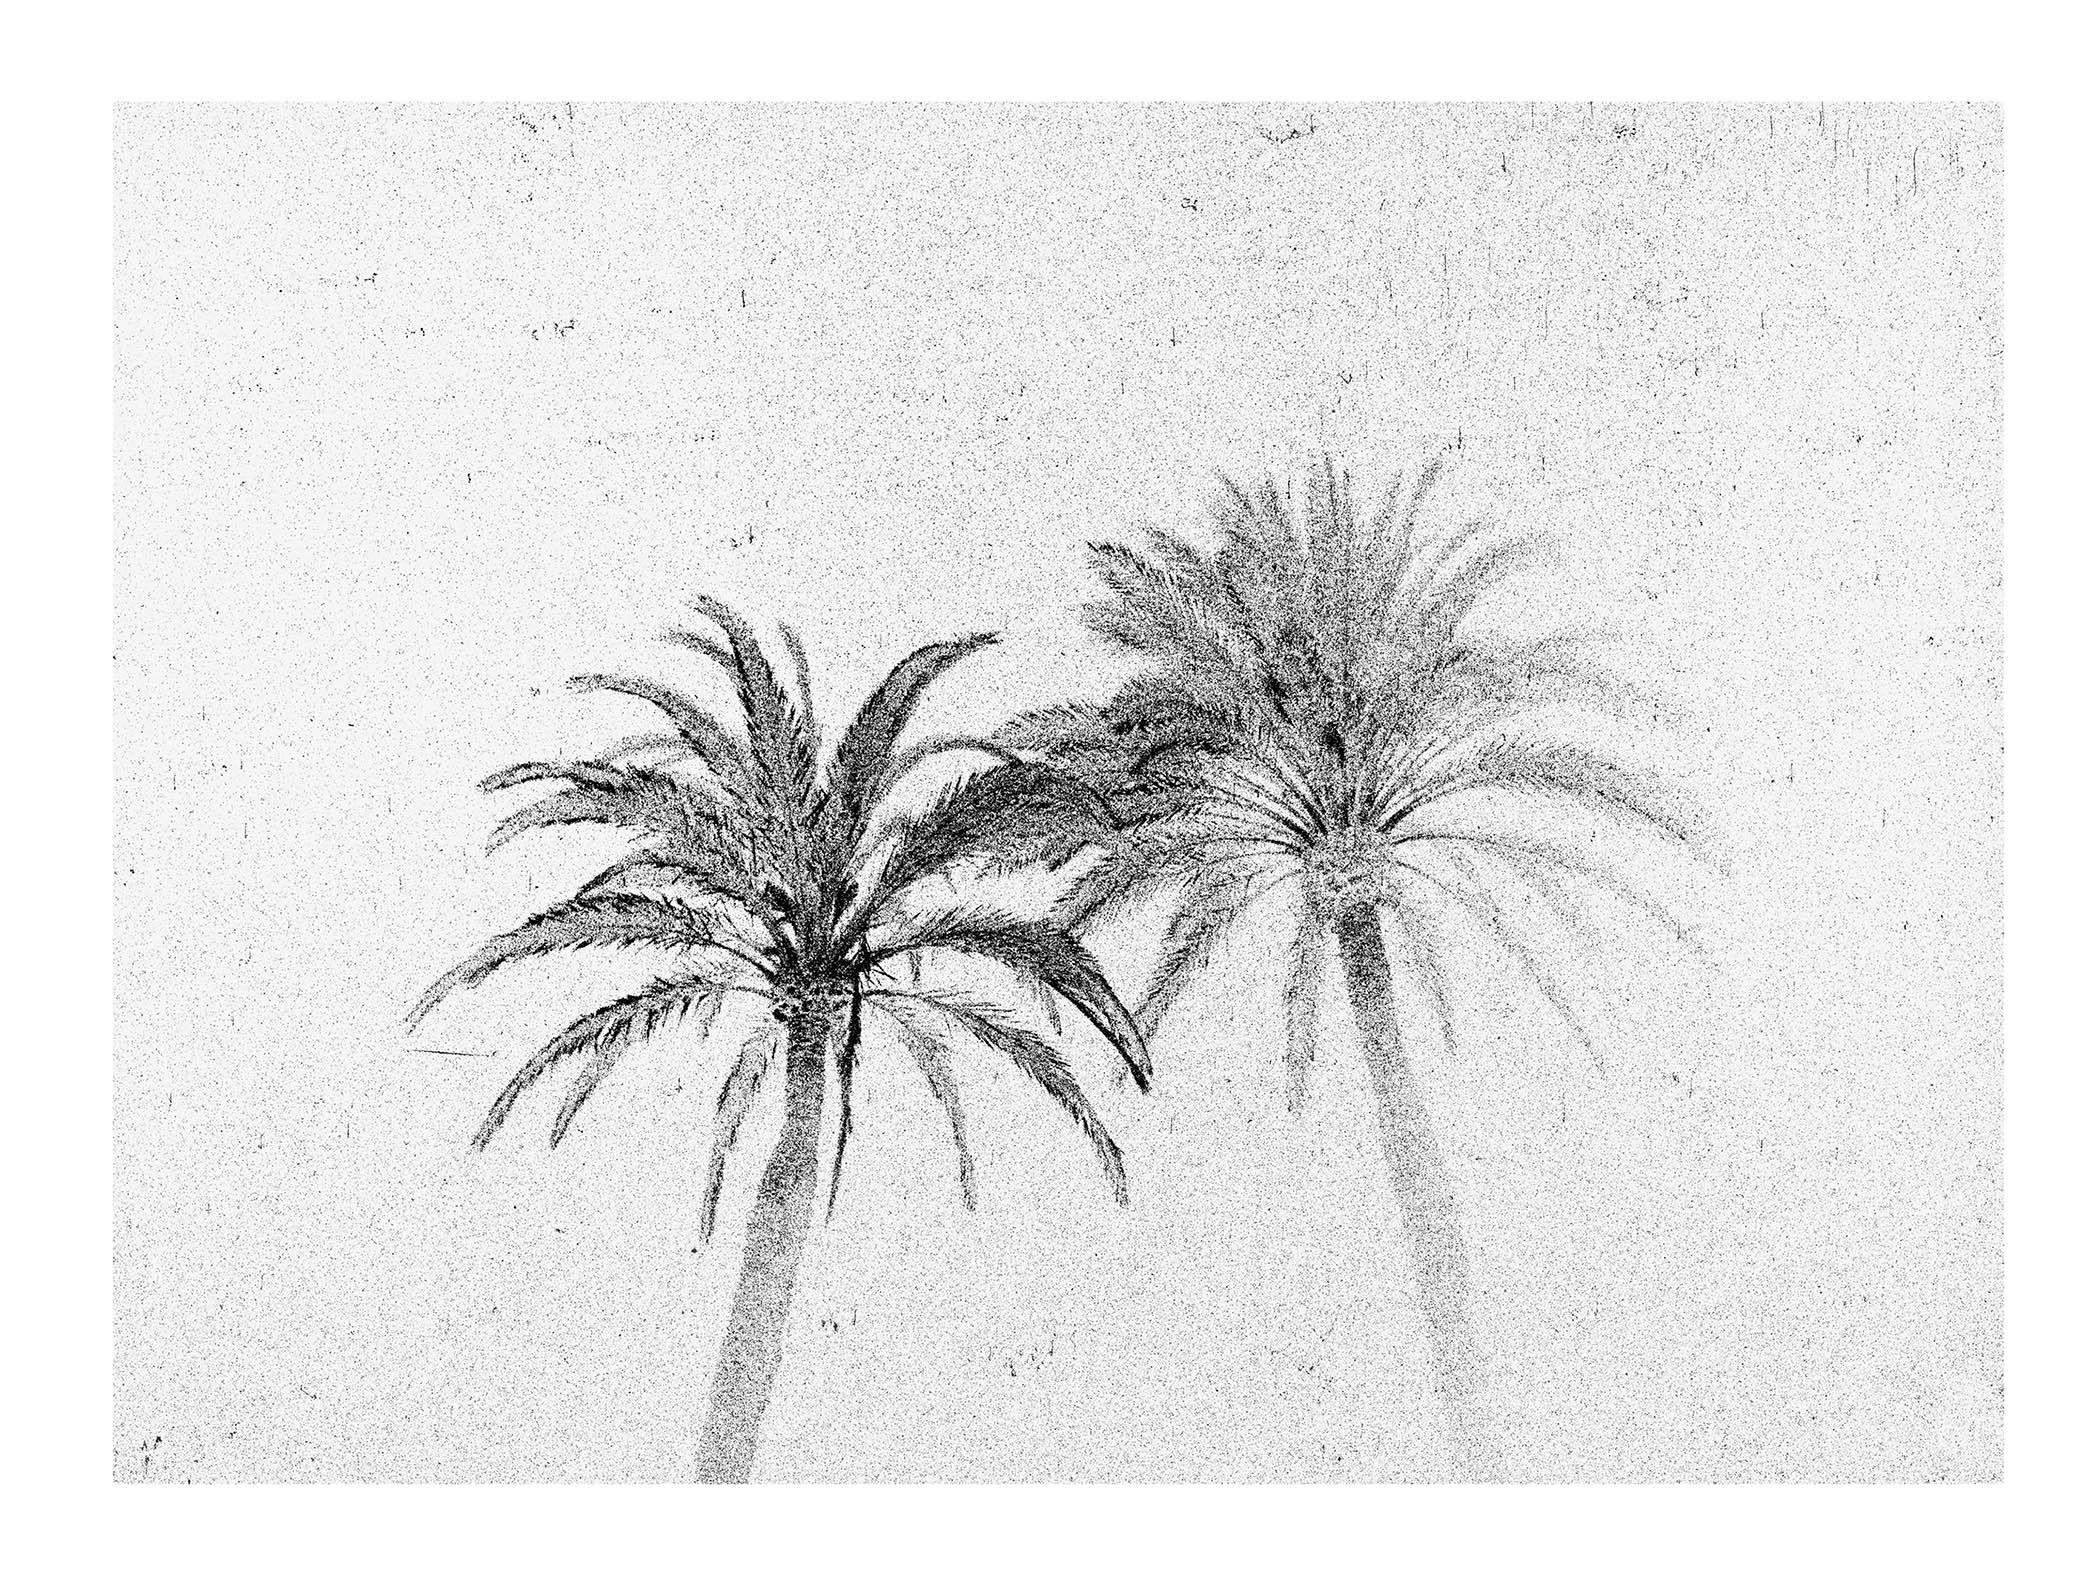 Three Palms-Black and white photo, gelatin silver triptych, palm trees, nature - Photograph by Osheen Harruthoonyan